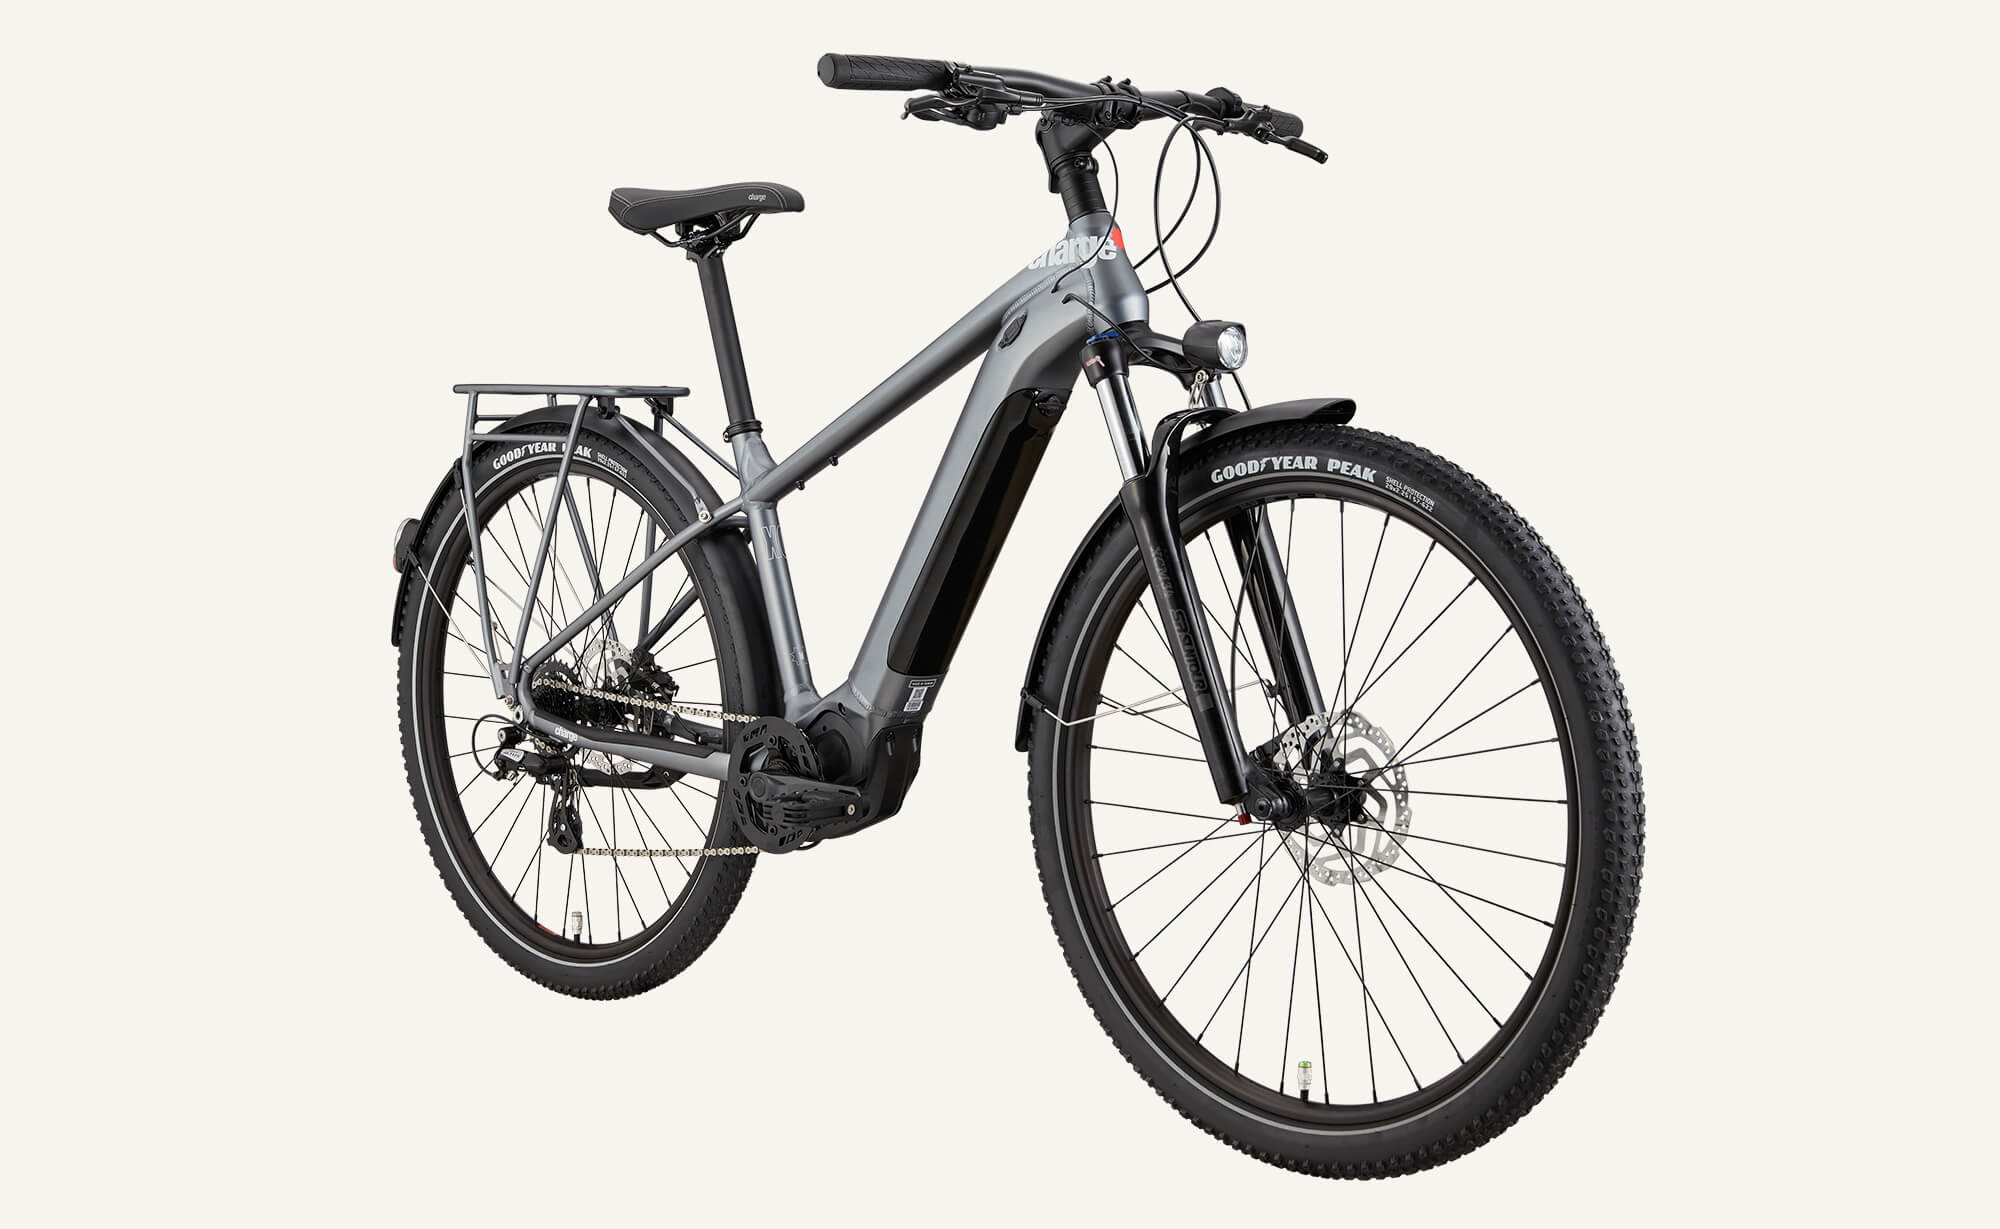 electric road bicycle